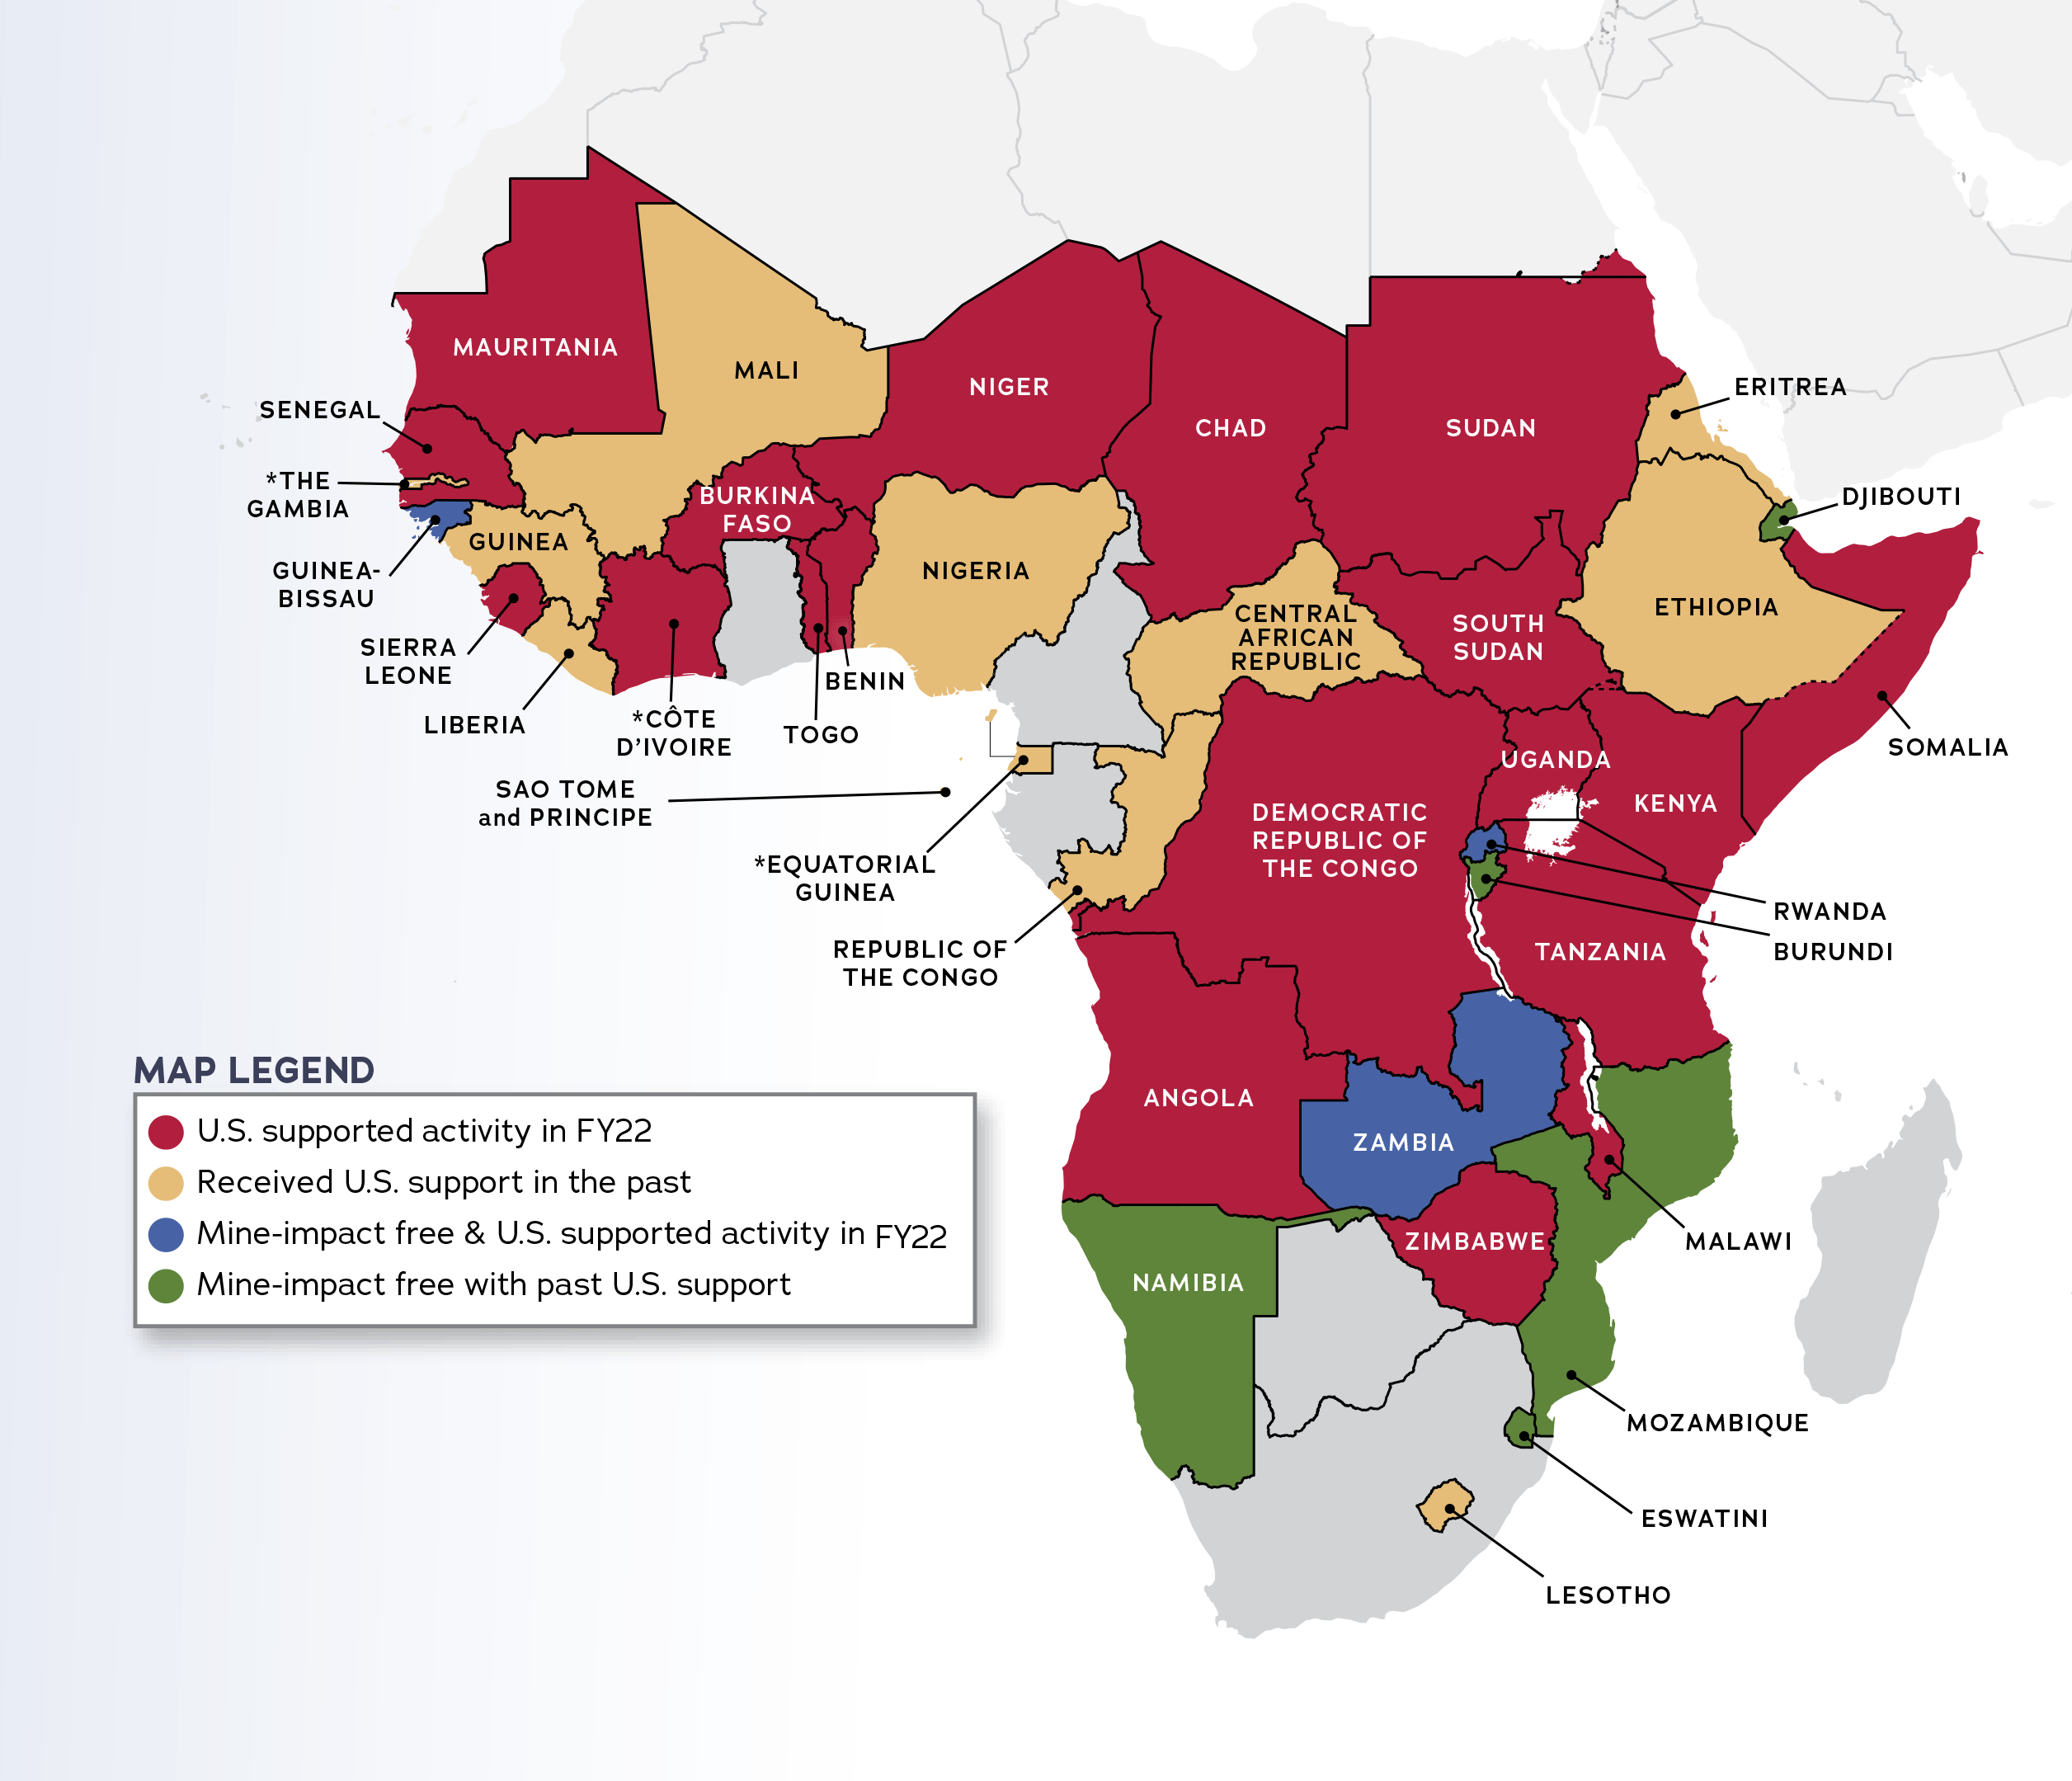 1993–2022 Overview of the U.S. Conventional Weapons Destruction Program: Africa Regional Map, full text description in Appendix A